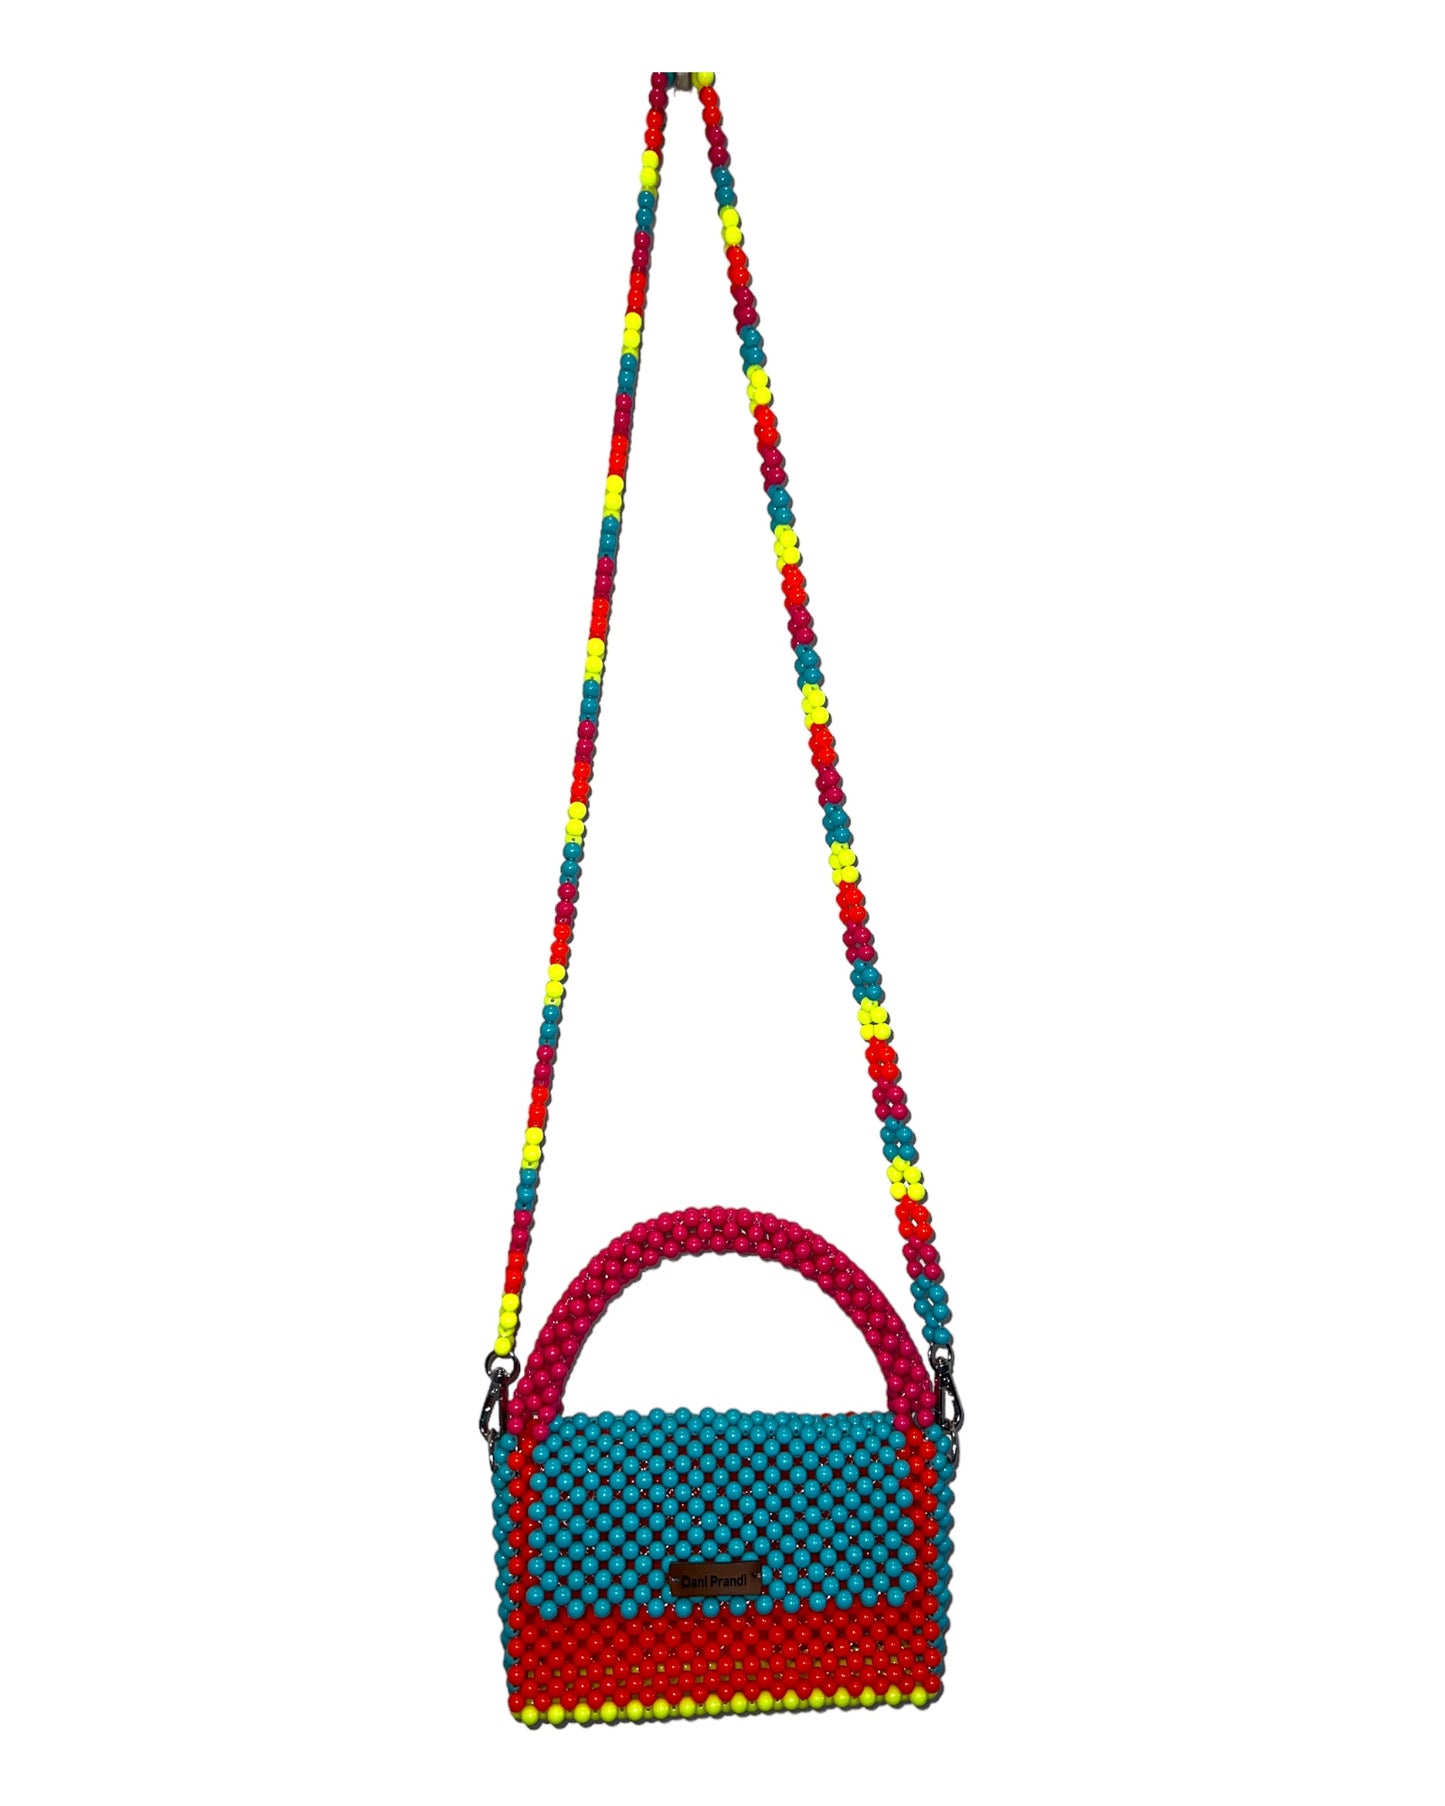 embroidered fashion bag adorned with high-quality faux stones, creating a stunning visual and tactile experience. The bag is carefully crafted in various colors, offering endless possibilities for fashion combinations. It comes with a removable shoulder strap made of the same material, and for added versatility, a second yellow shoulder strap is included, allowing for a delightful variation in color combinations.